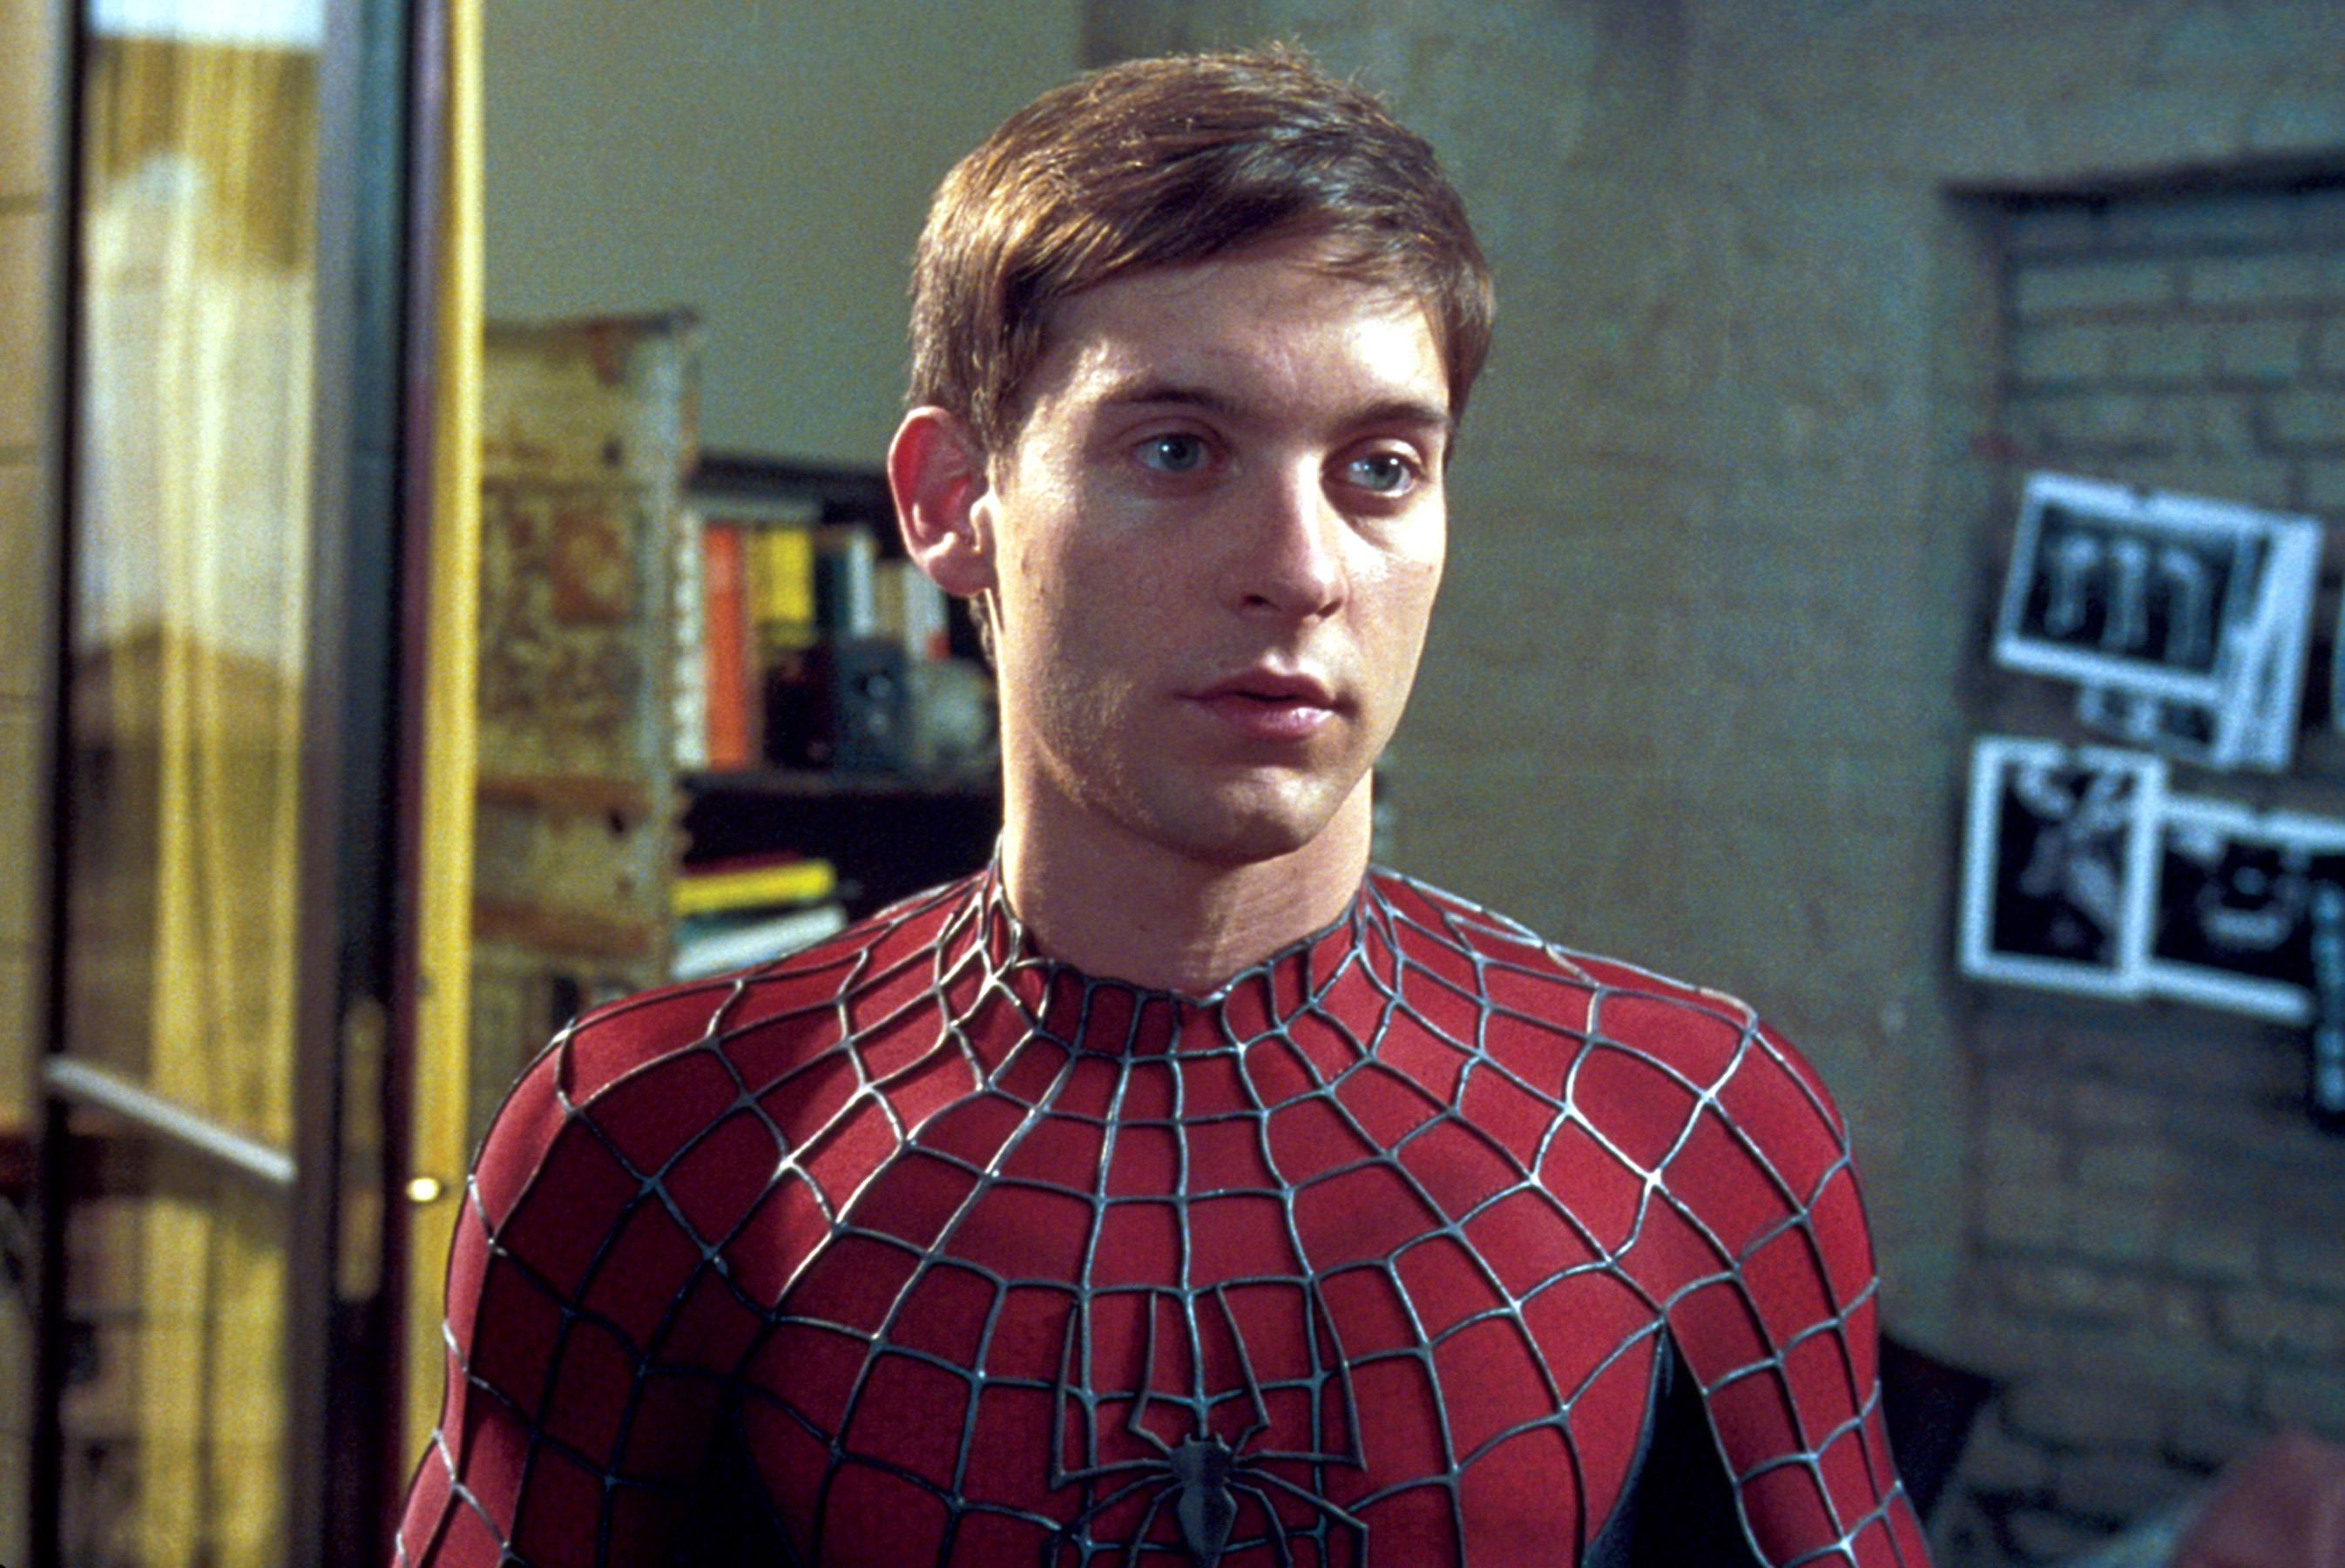 Peter Parker in Spider-Man suit without the mask, looking concerned